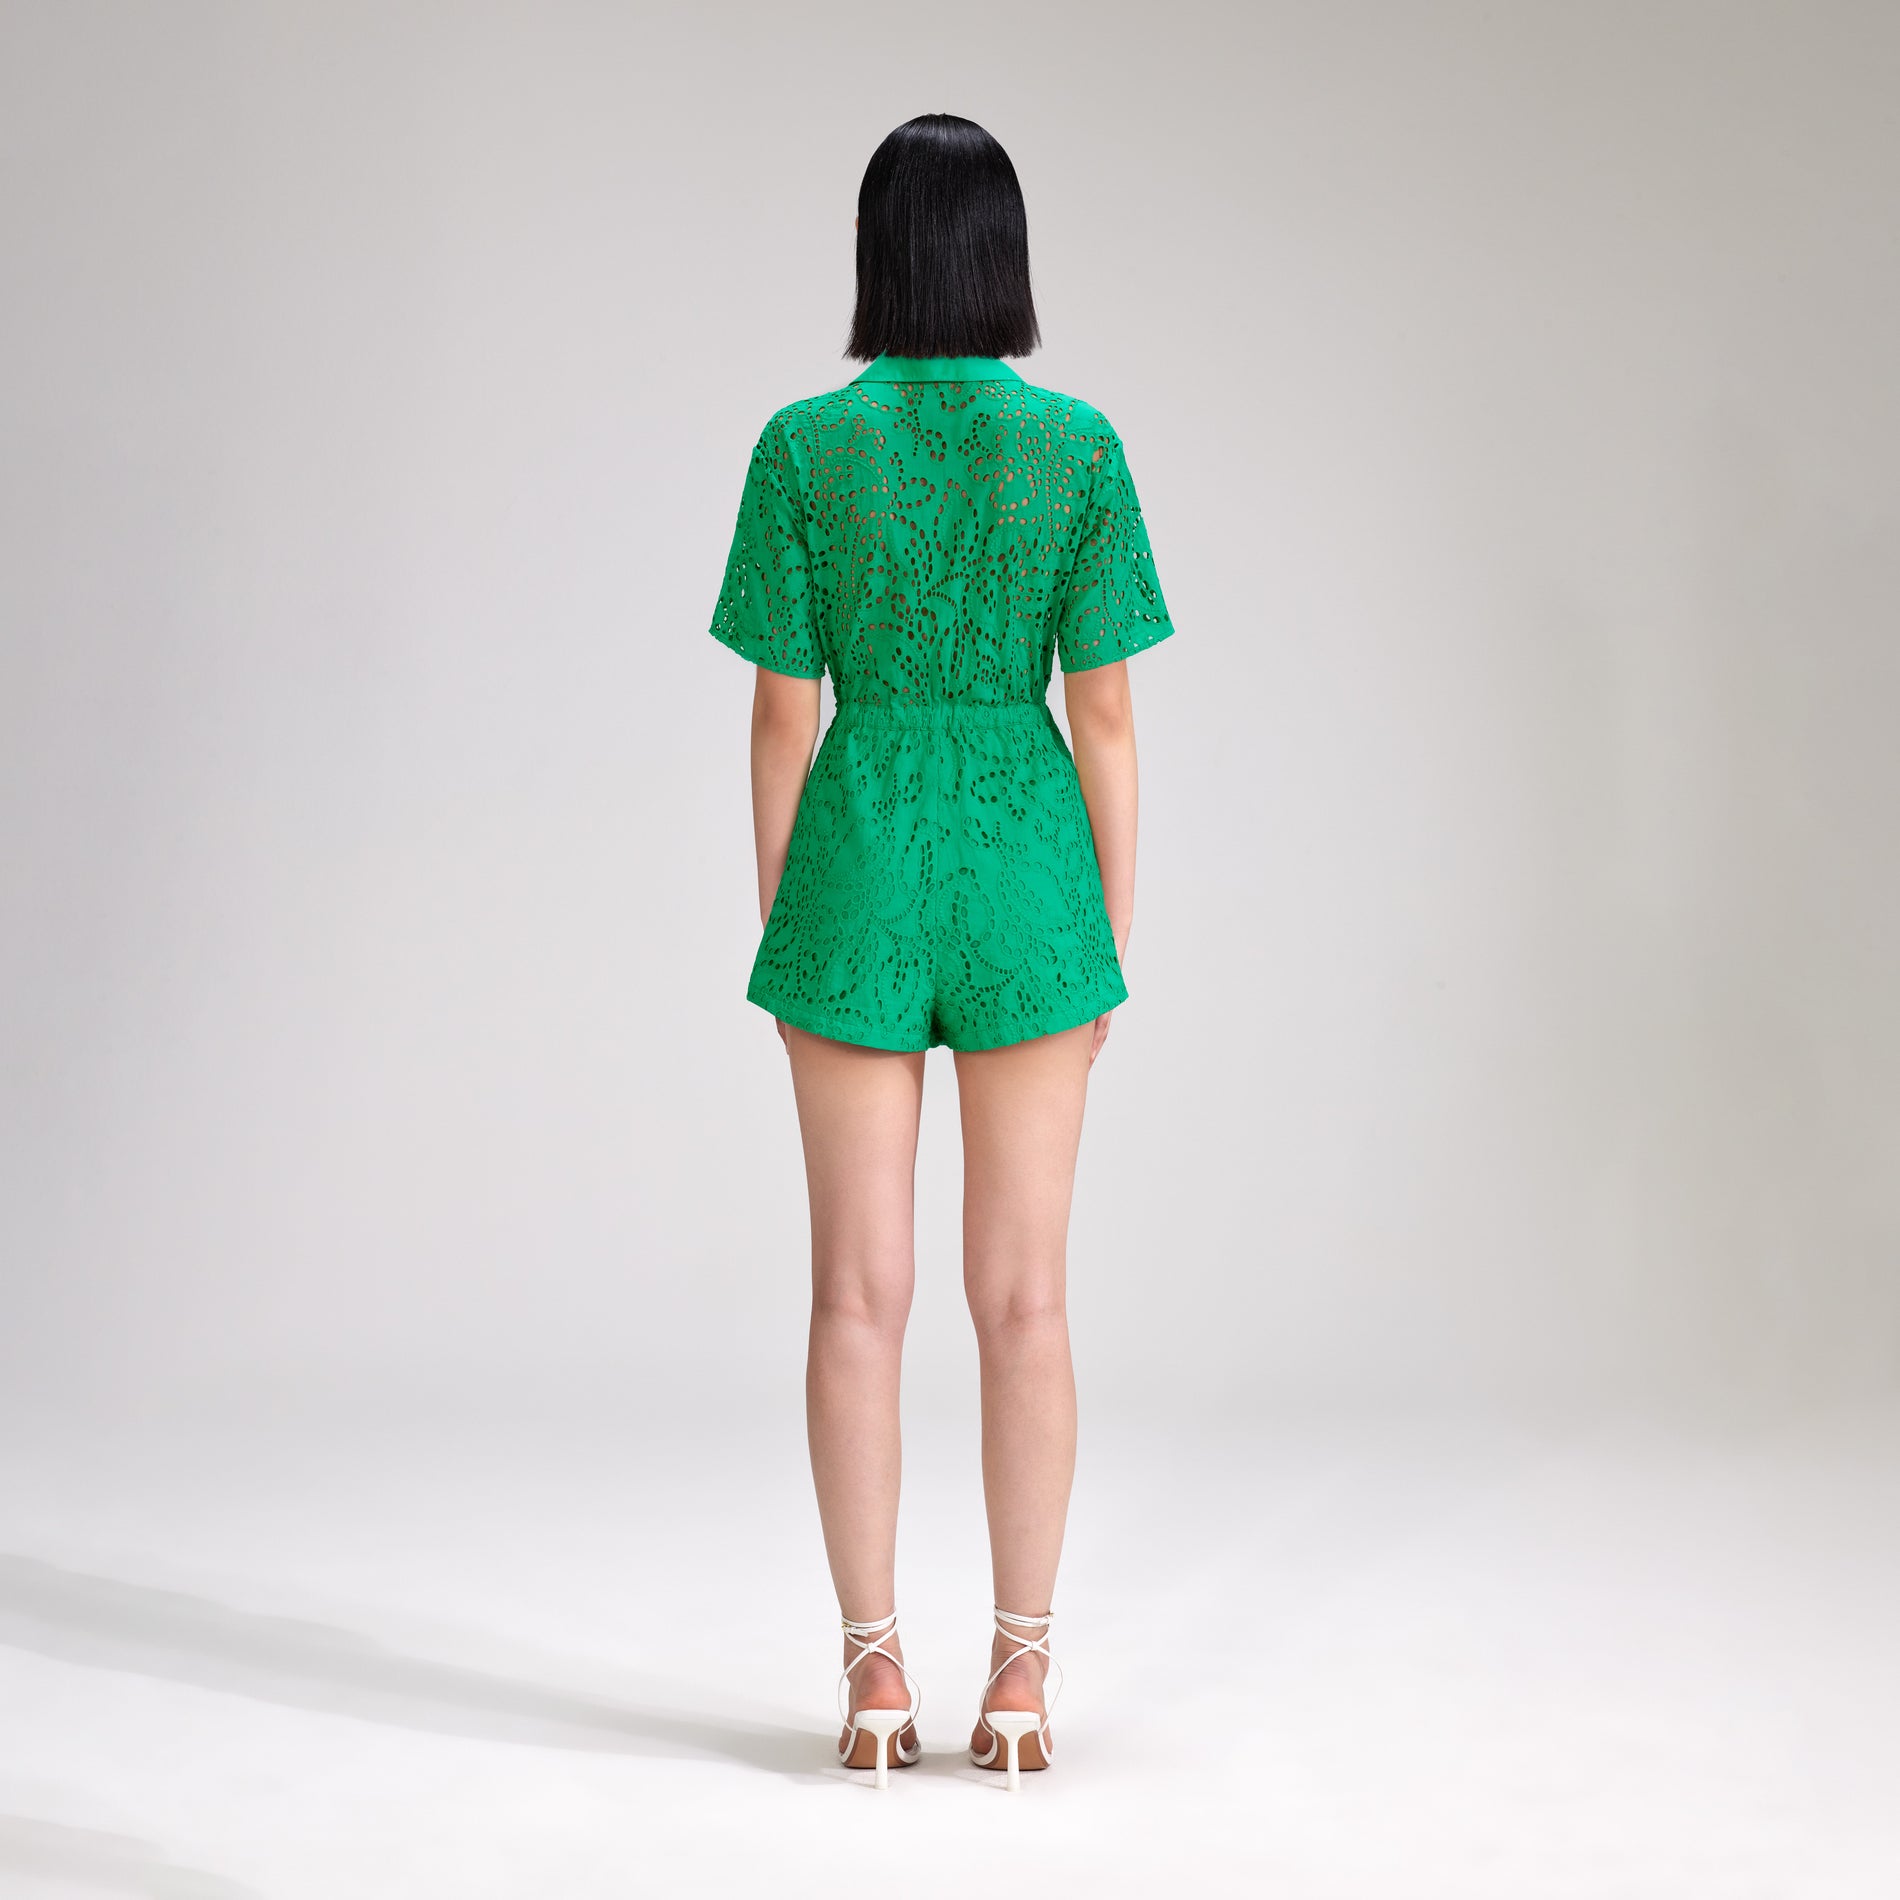 A woman wearing the Green Broderie Playsuit